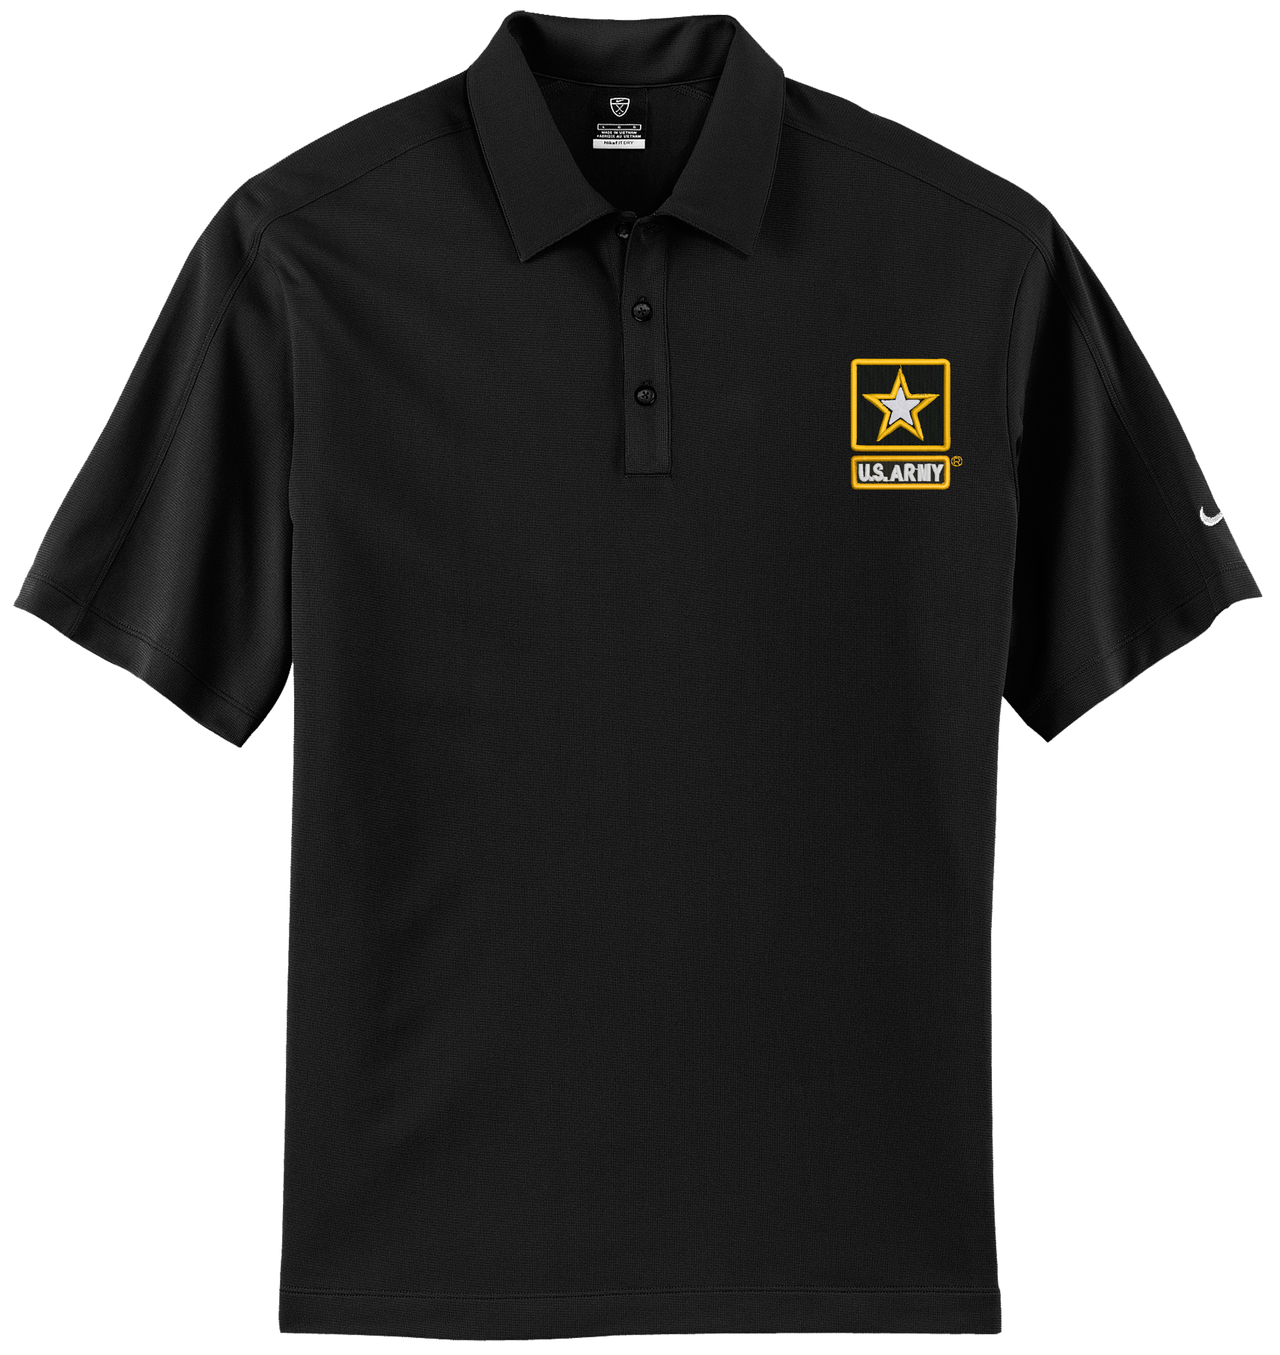 US Army Star Embroidered on Black NIKE Polo